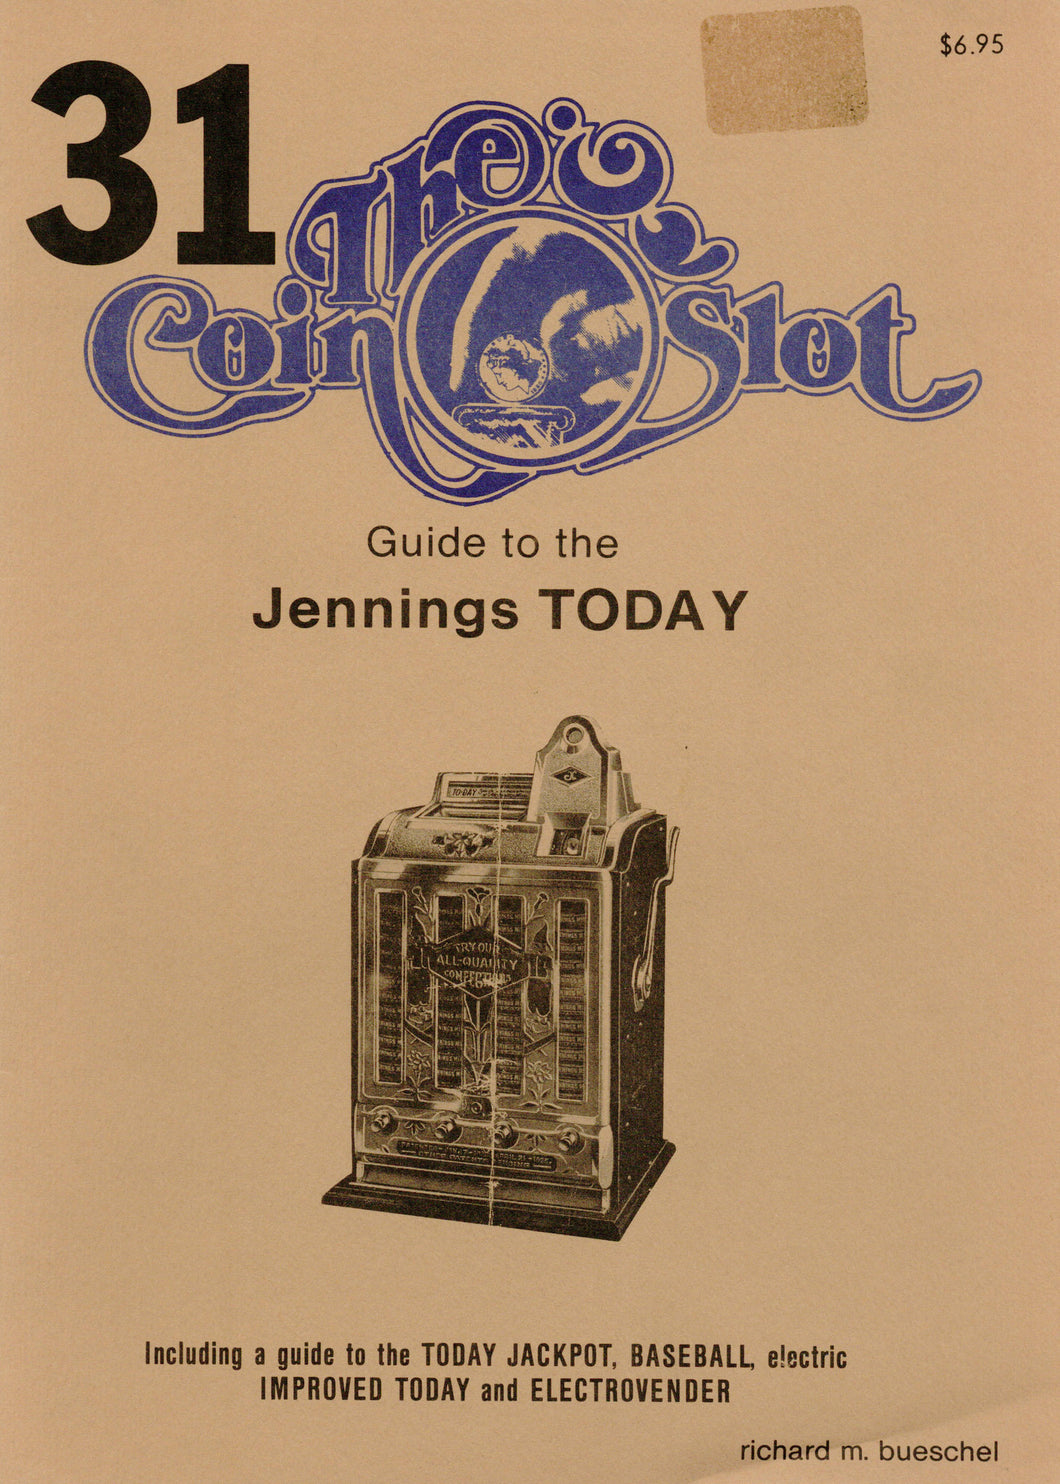 Coin Slot #31. Guide to the Jennings Today